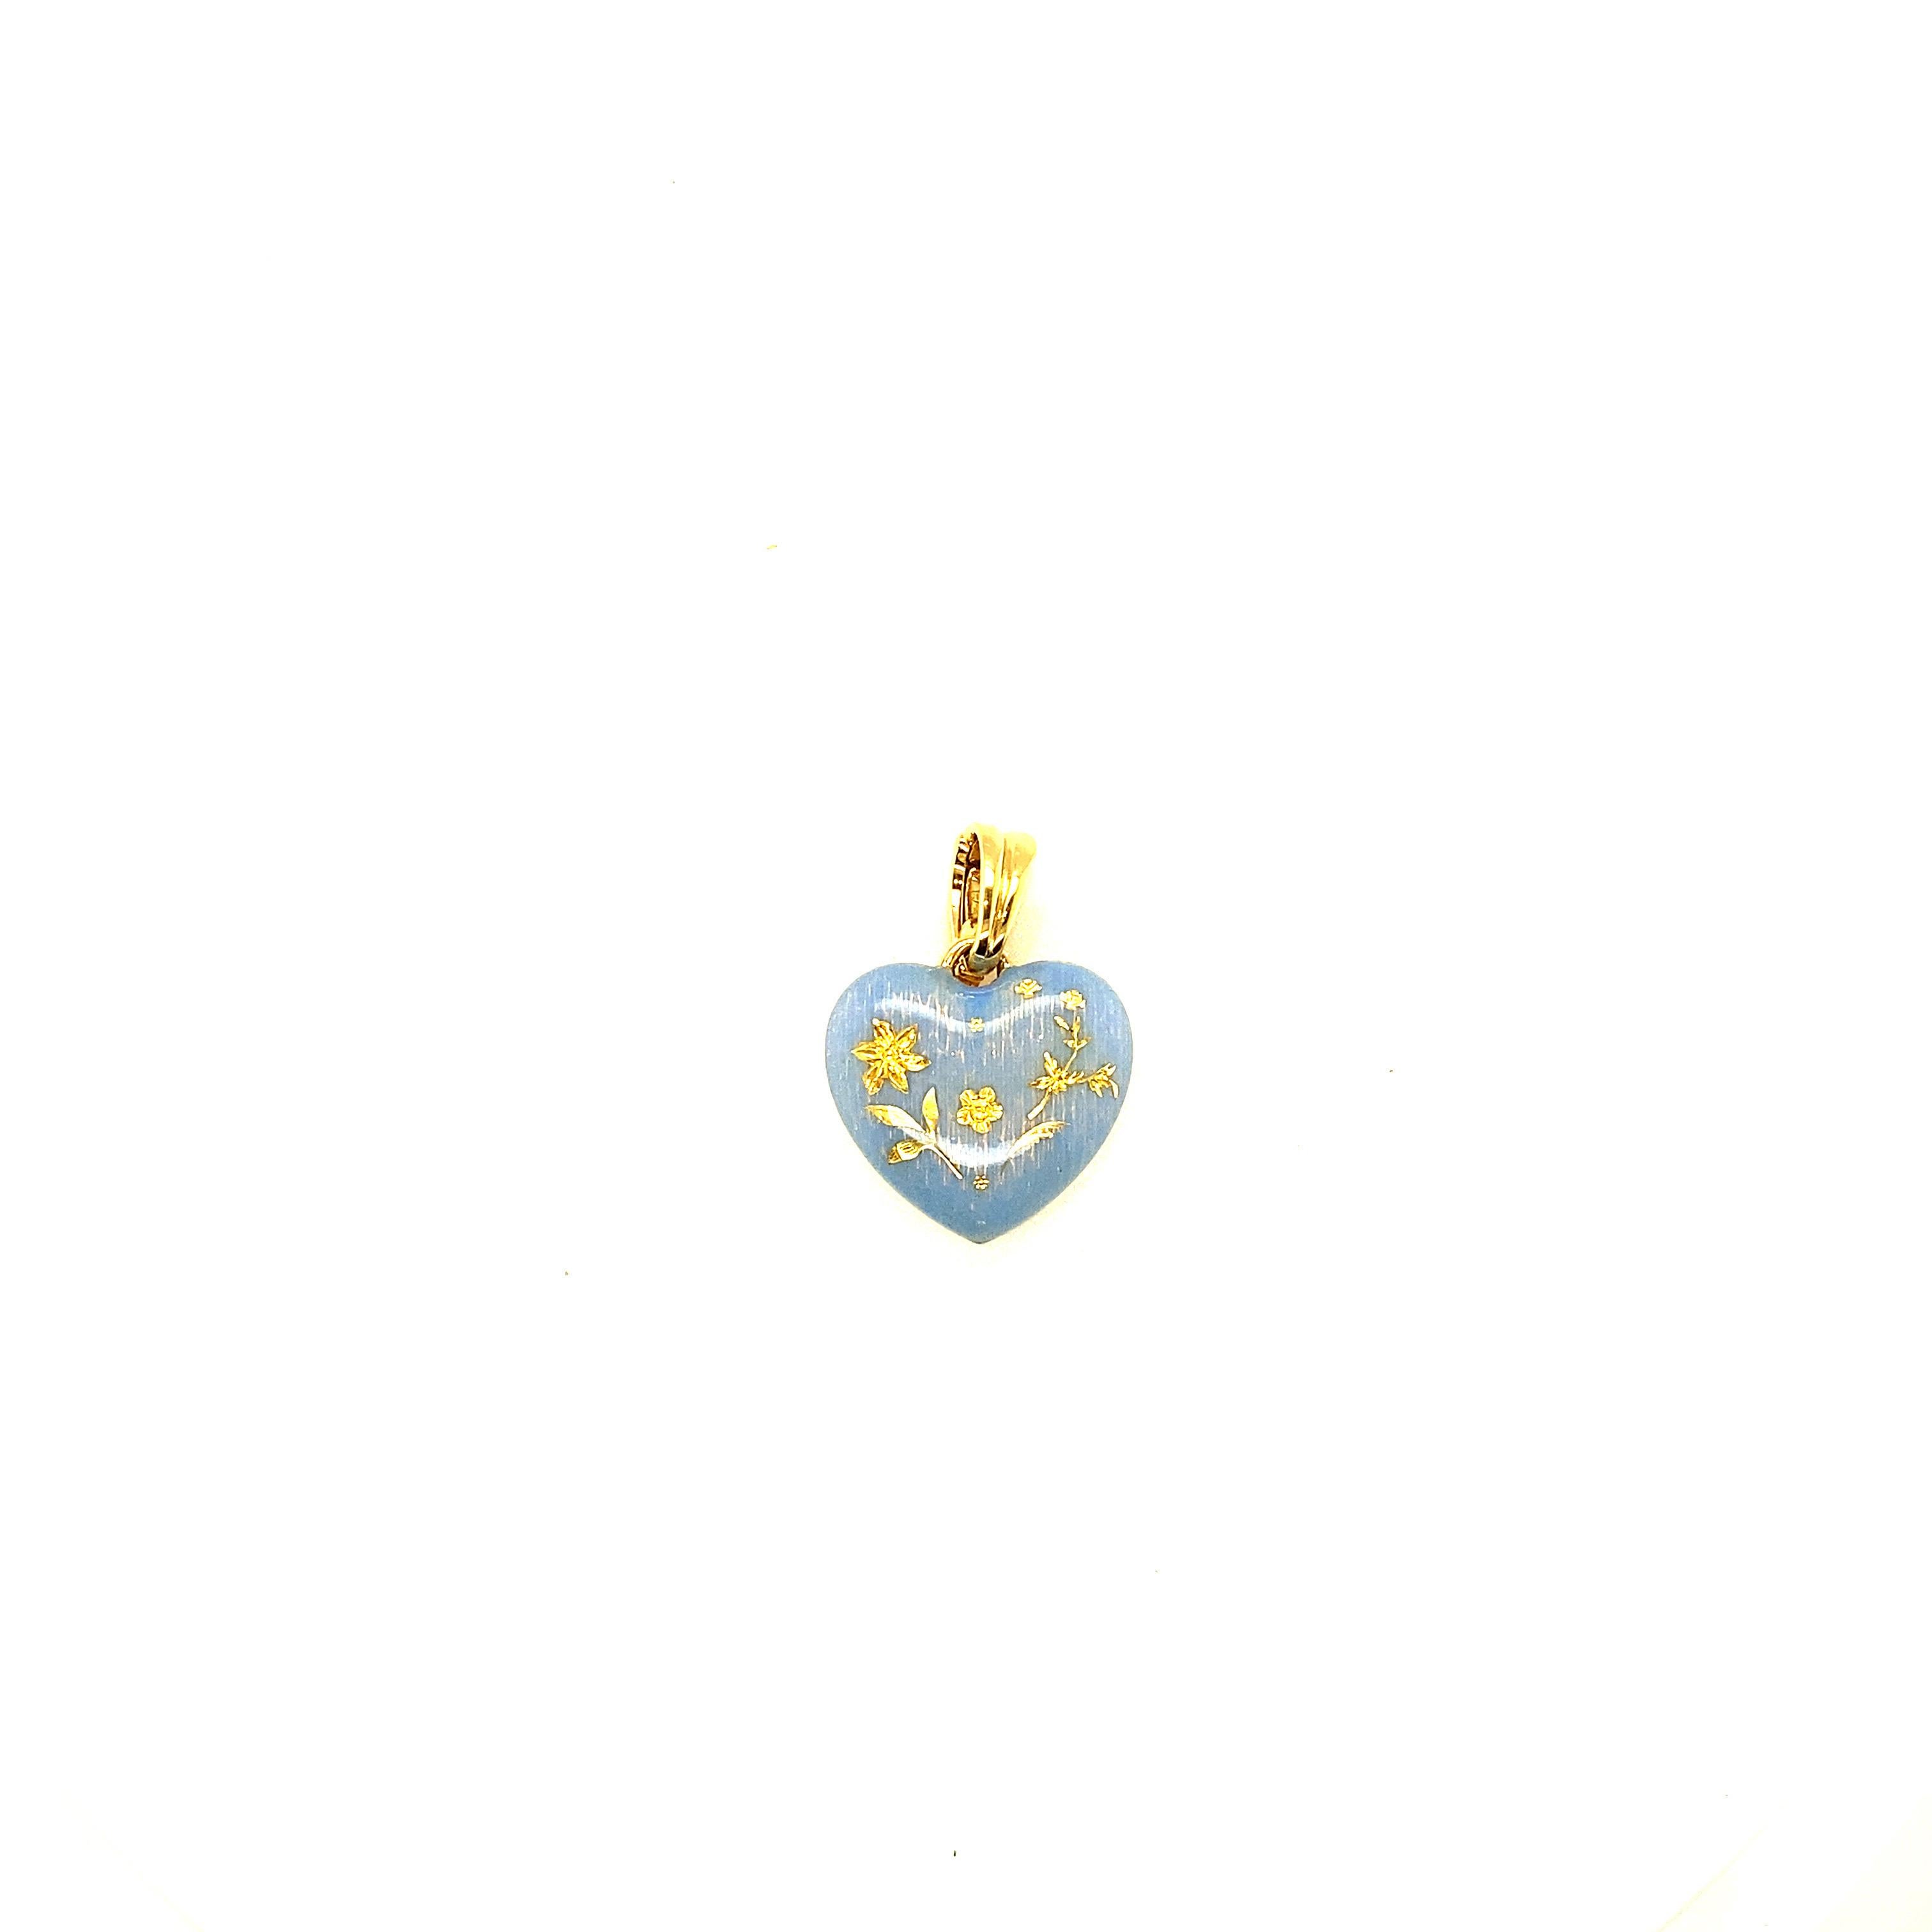 Faberge 18 Karat Yellow Gold and Perriwinkle Blue Enamel Heart Pendant Charm For Sale 1